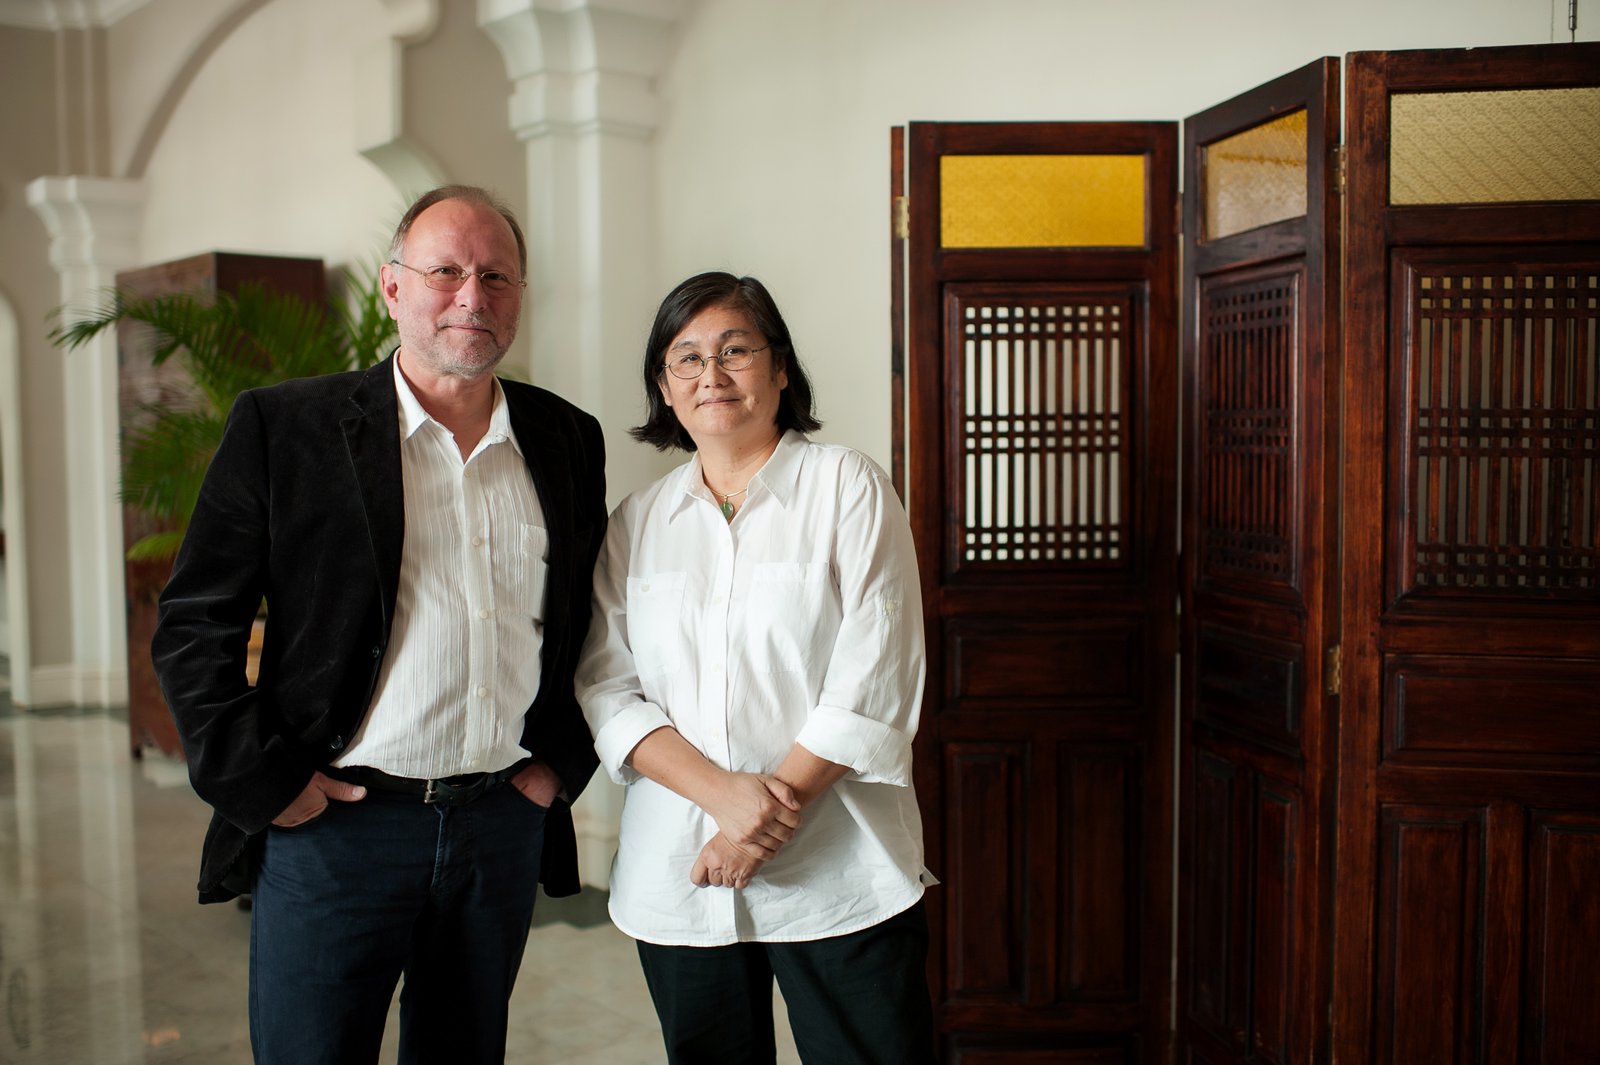 Dr Jane Cardosa, co-founder & CSO, & Mr Peter Wulff, director & CEO, Sentinext Therapeutics, Malaysia.